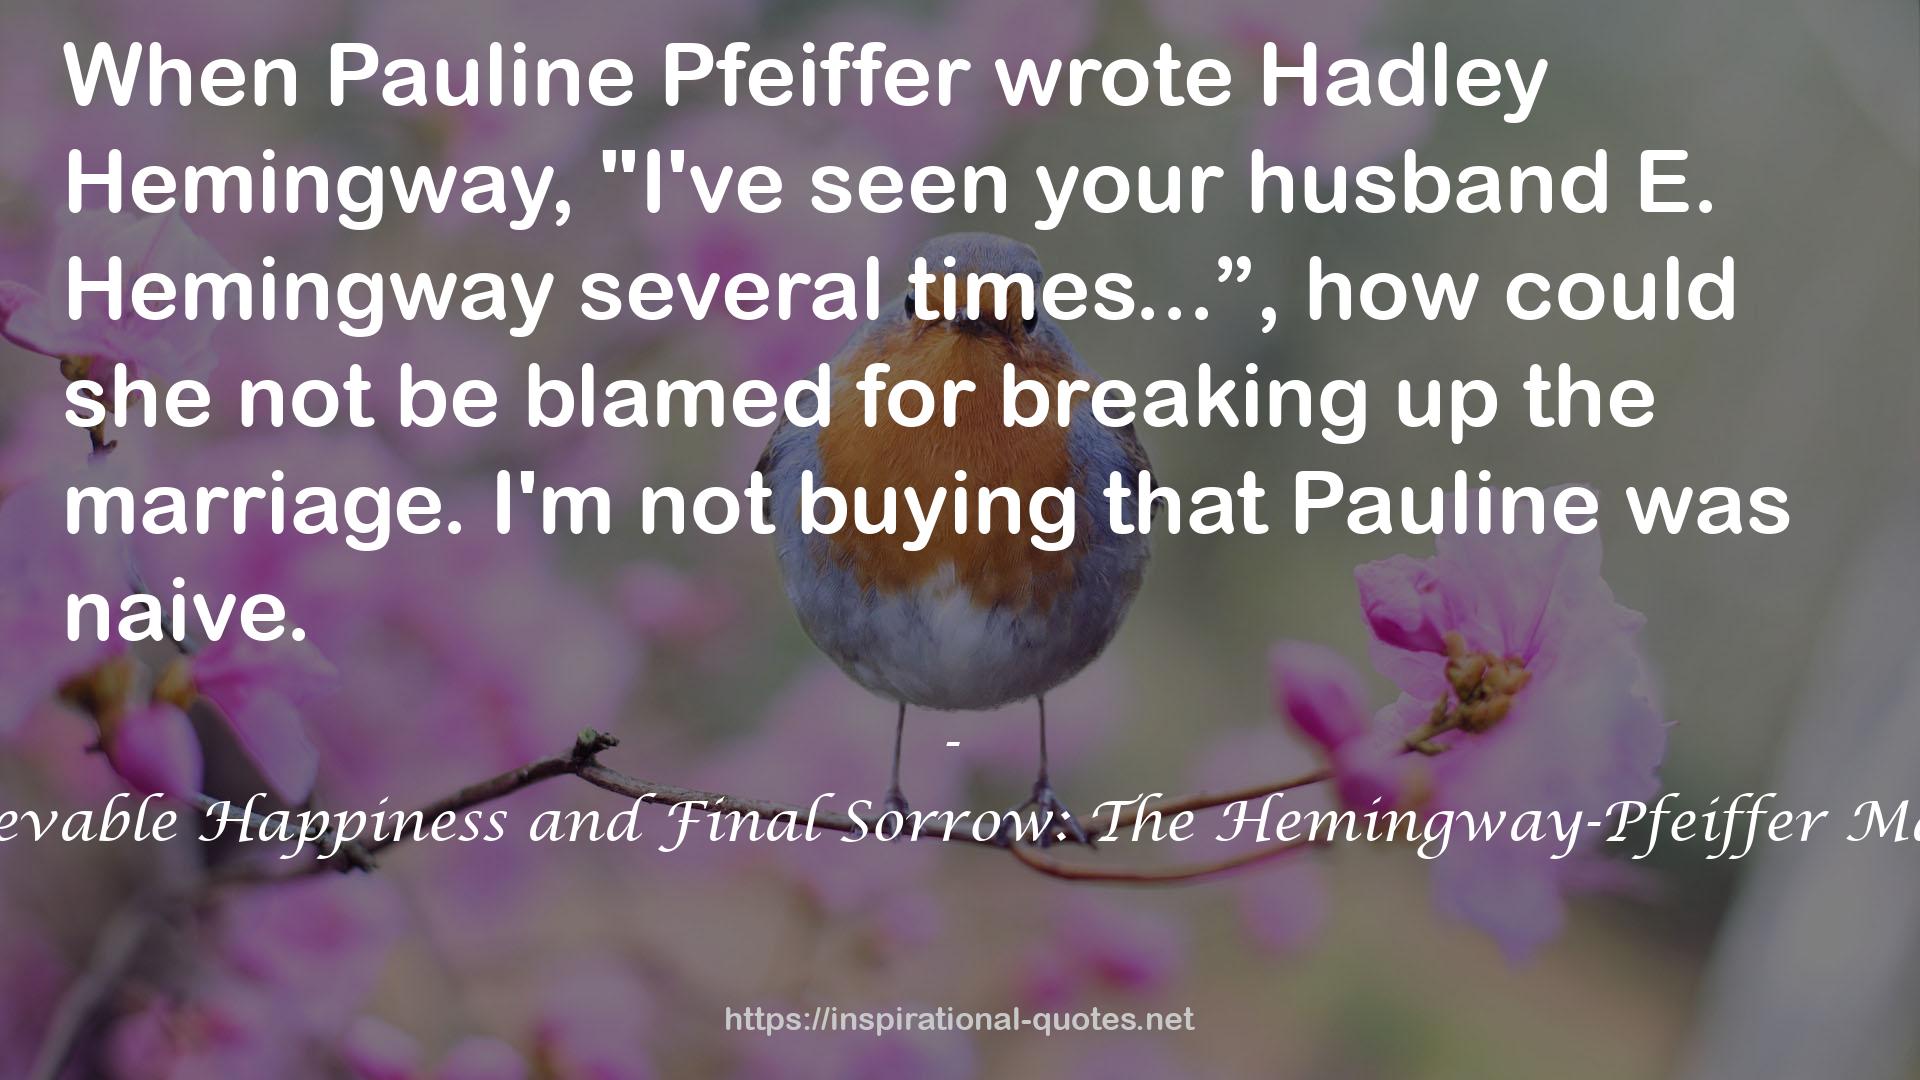 Unbelievable Happiness and Final Sorrow: The Hemingway-Pfeiffer Marriage QUOTES